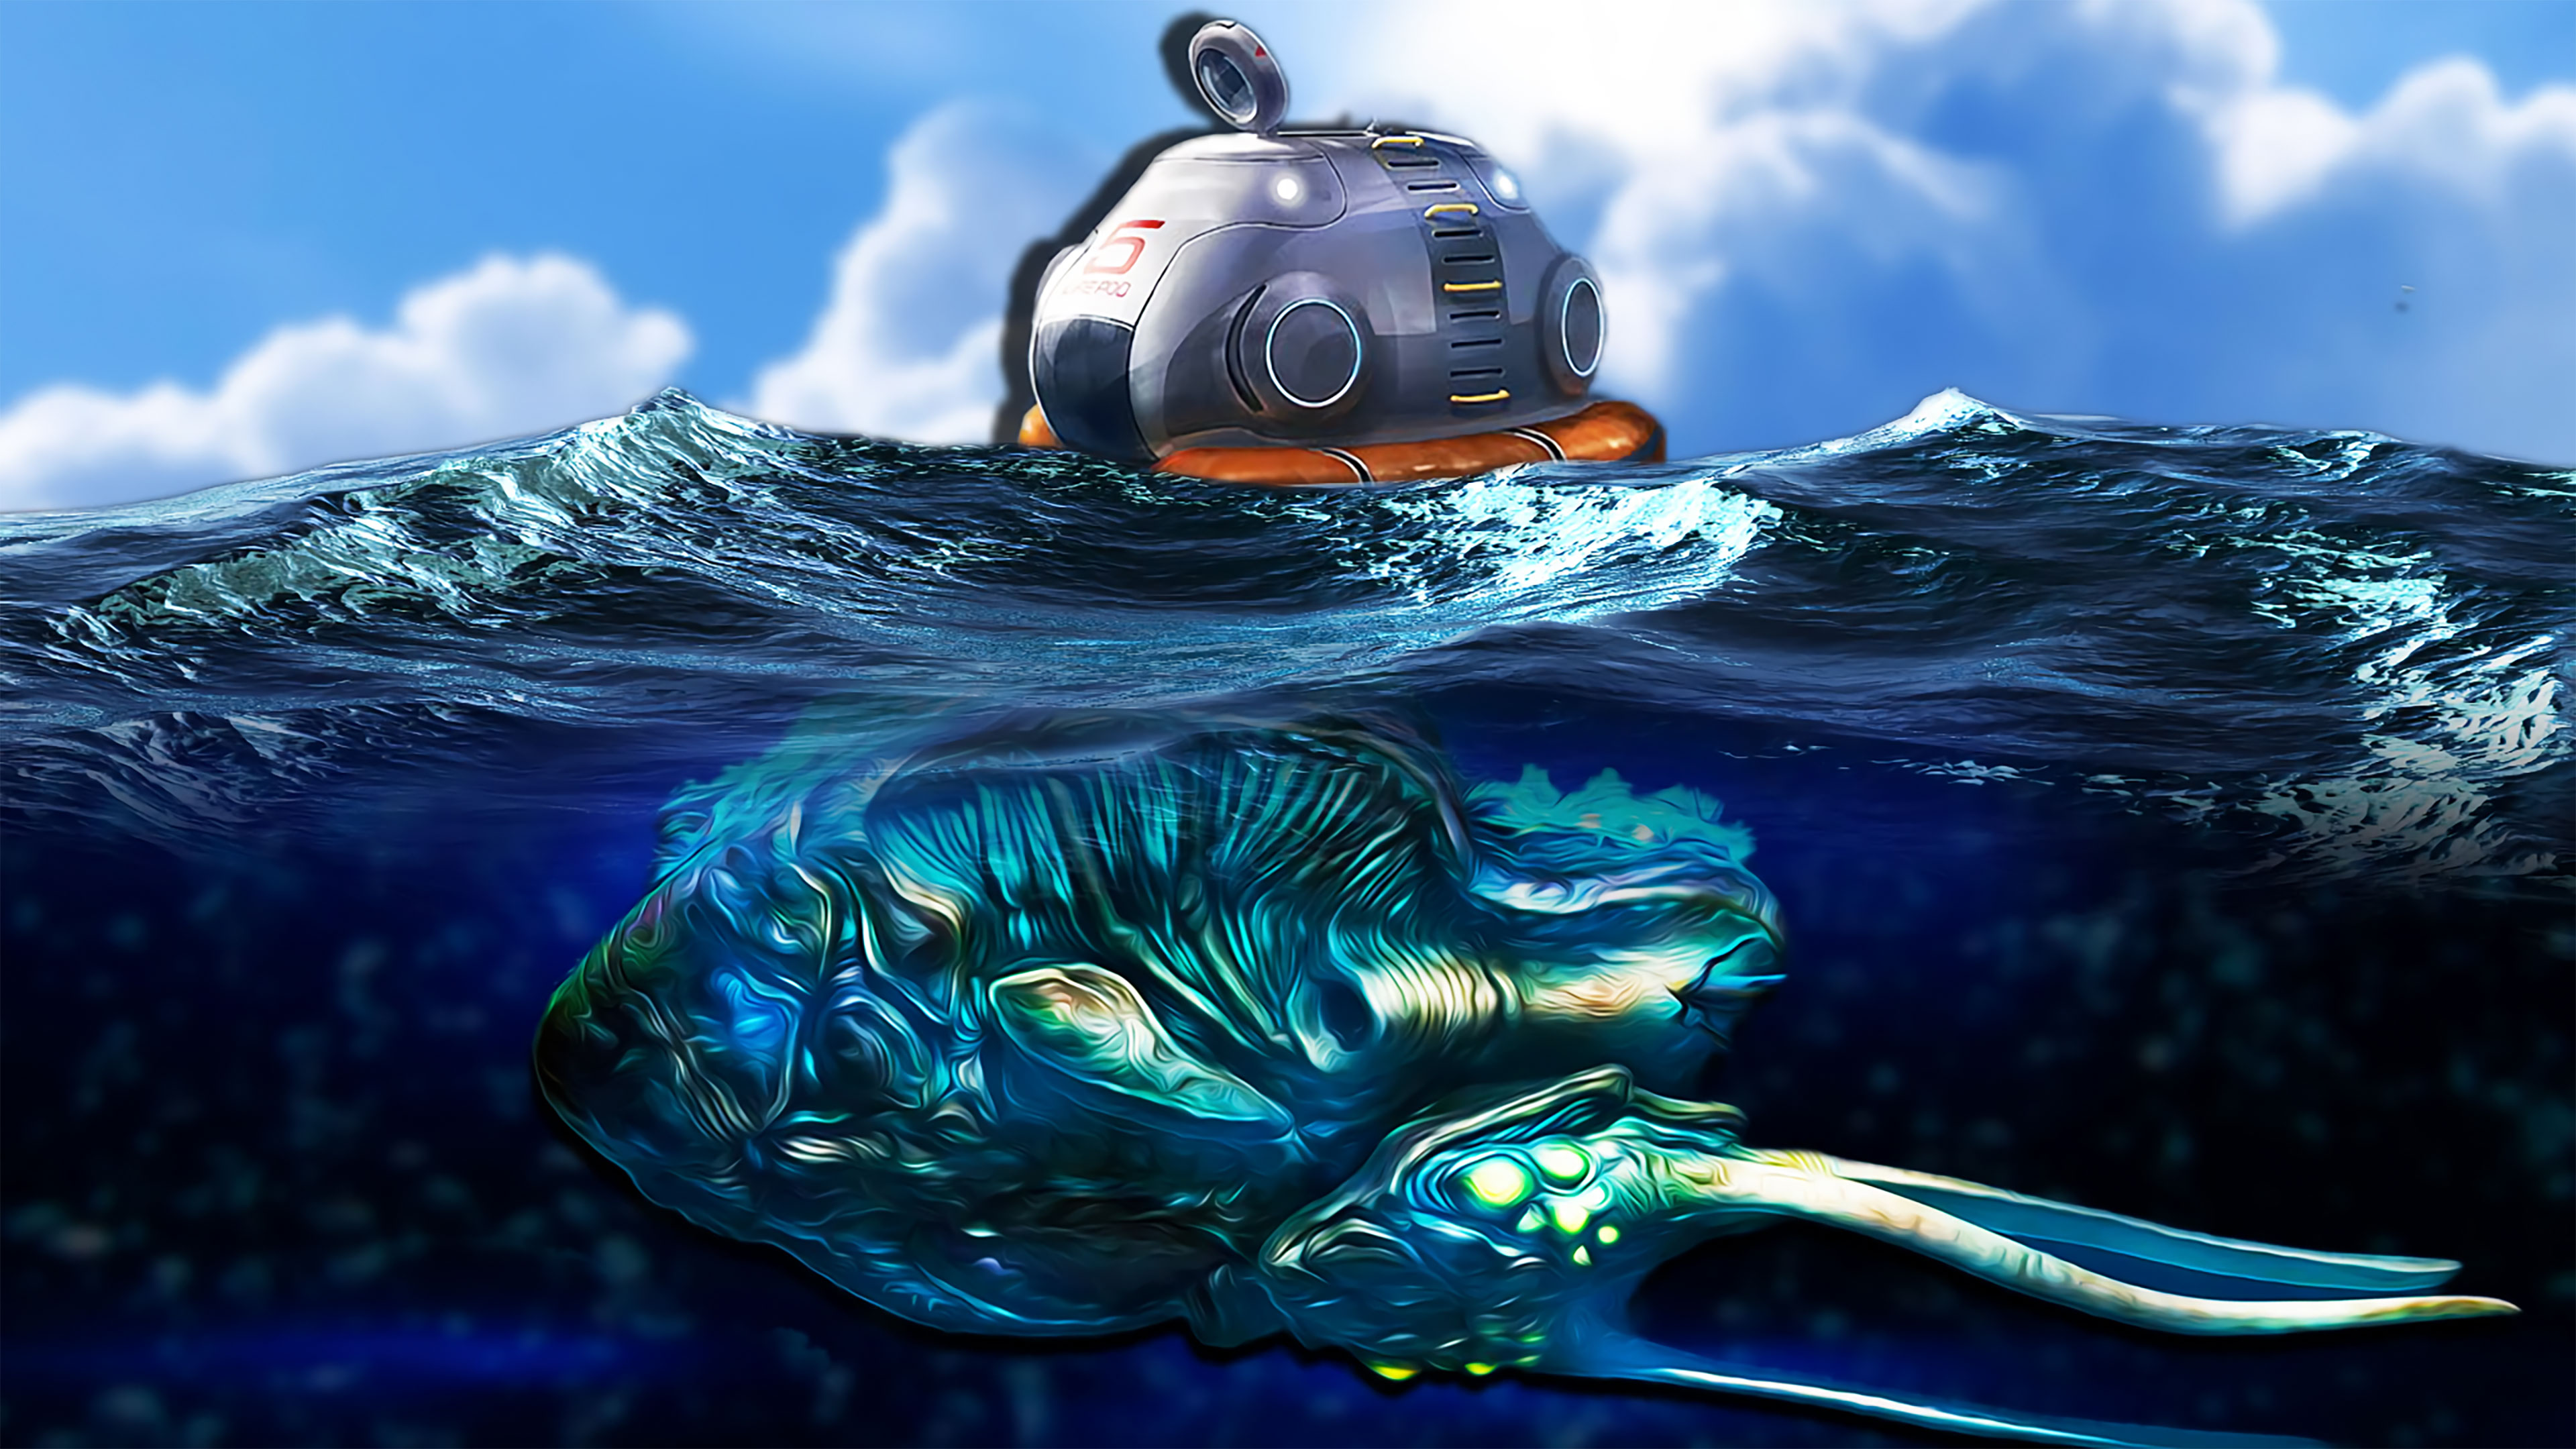 Subnautica Wallpapers in Ultra HD 4K 3840x2160